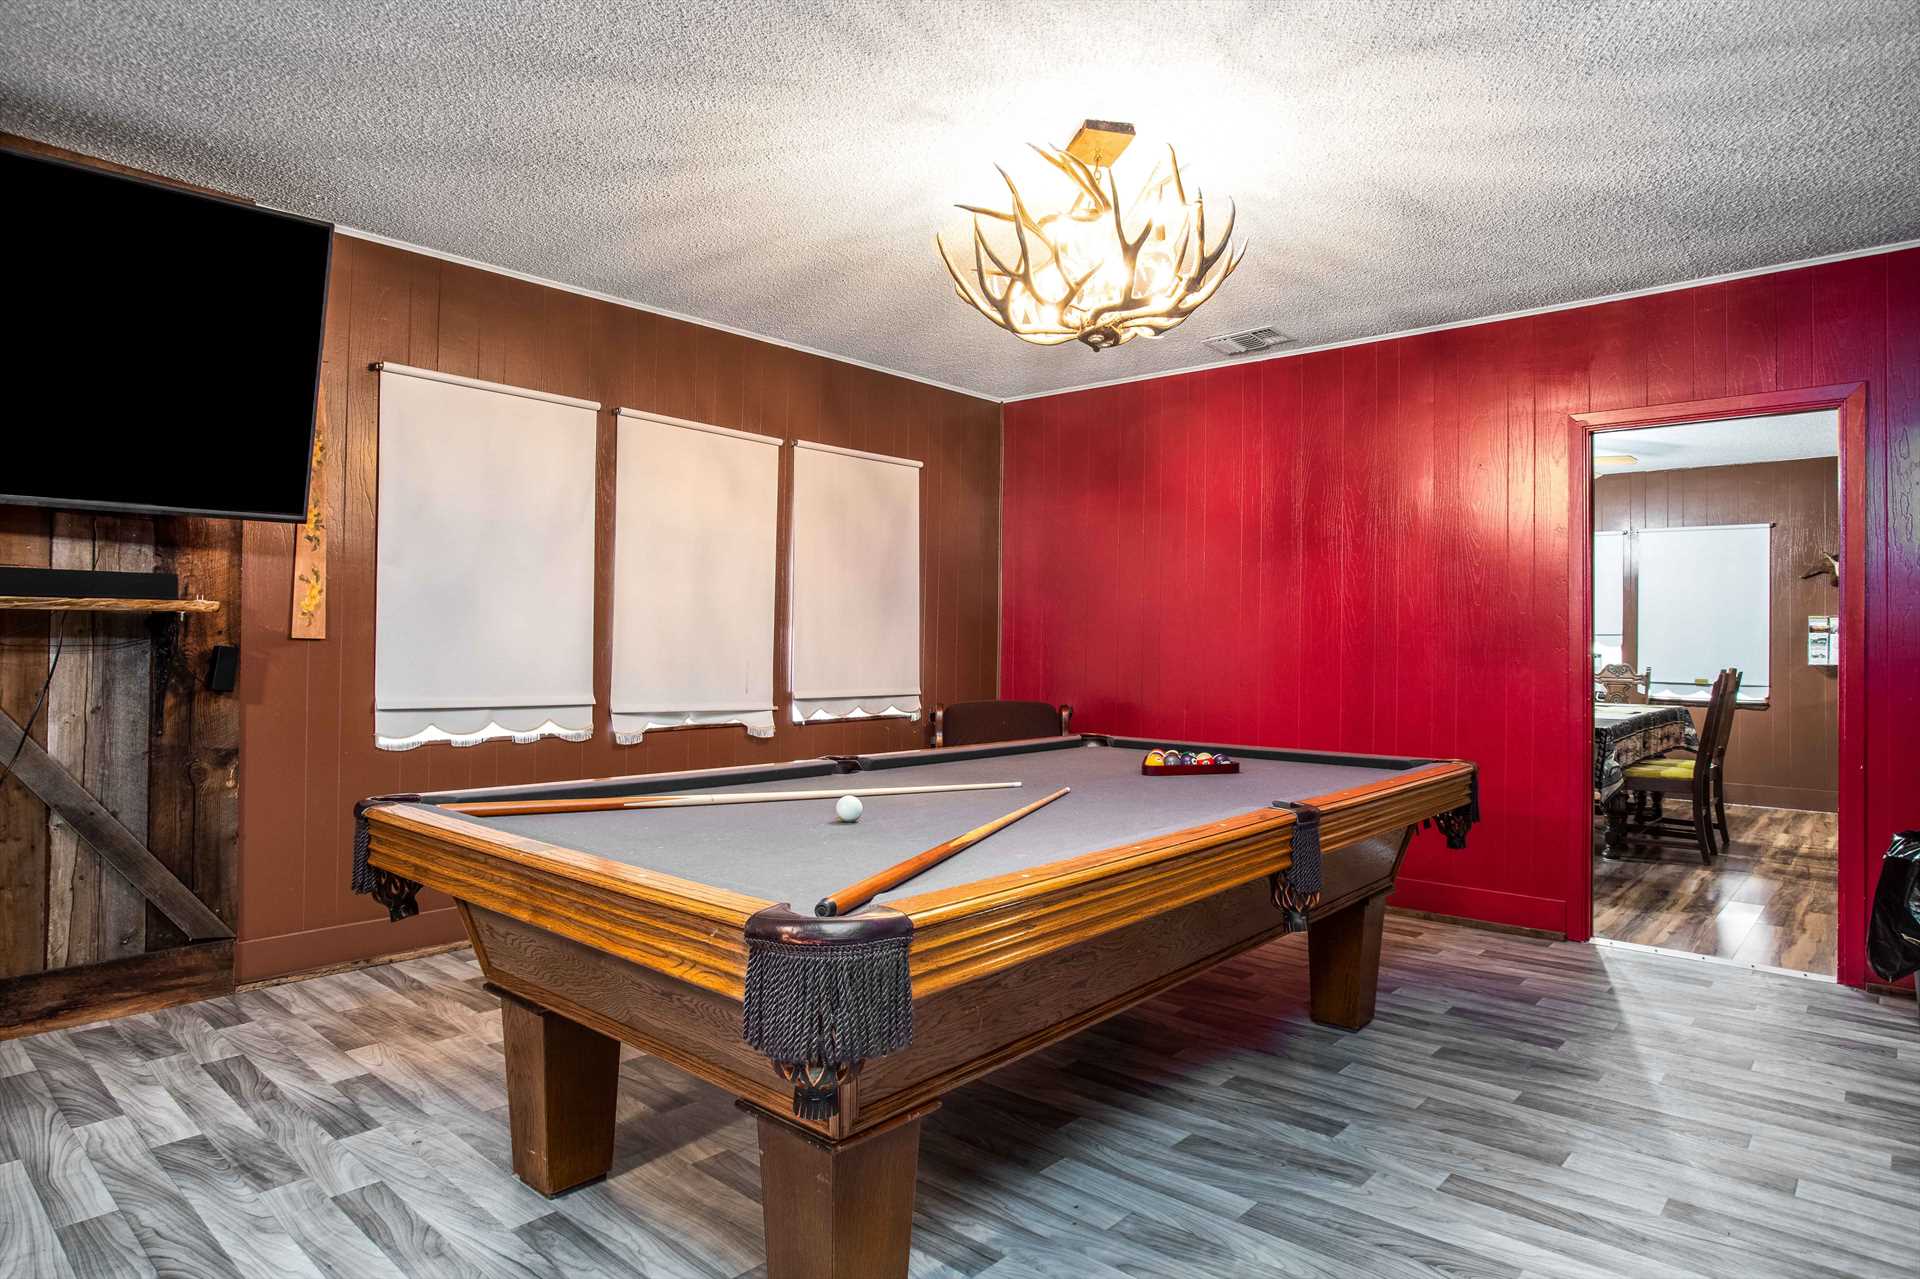                                                 Rack 'em up and enjoy a game on the old-style drop pocket pool table!